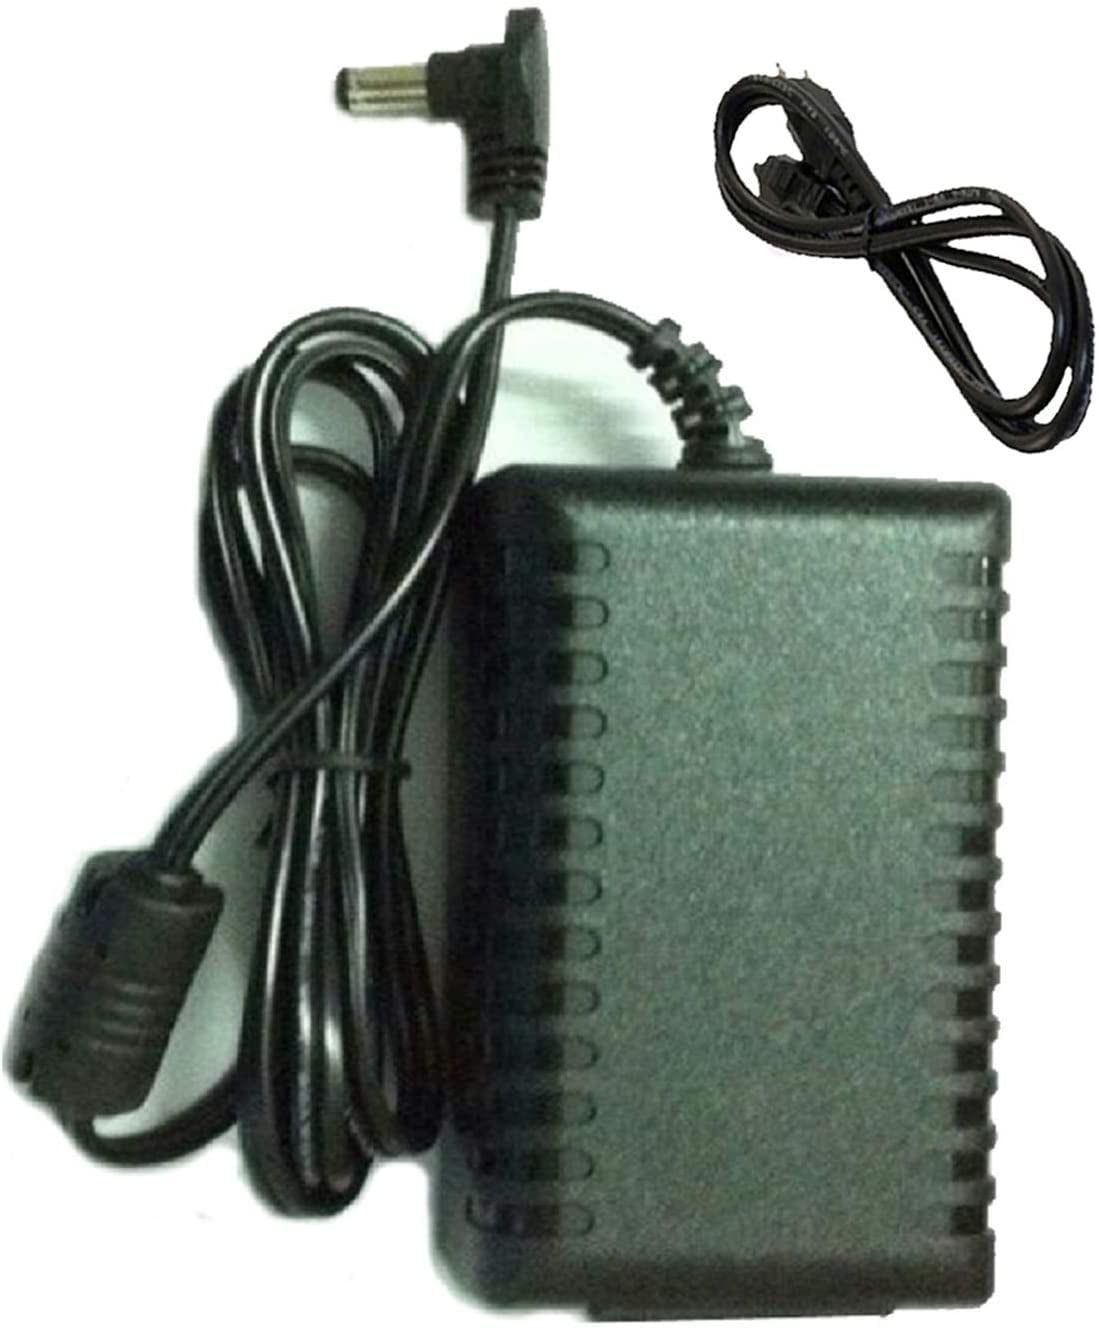 48V AC/DC Adapter For TalkSwitch TS-350i IP Telephone VoIP Phone Power Charger 